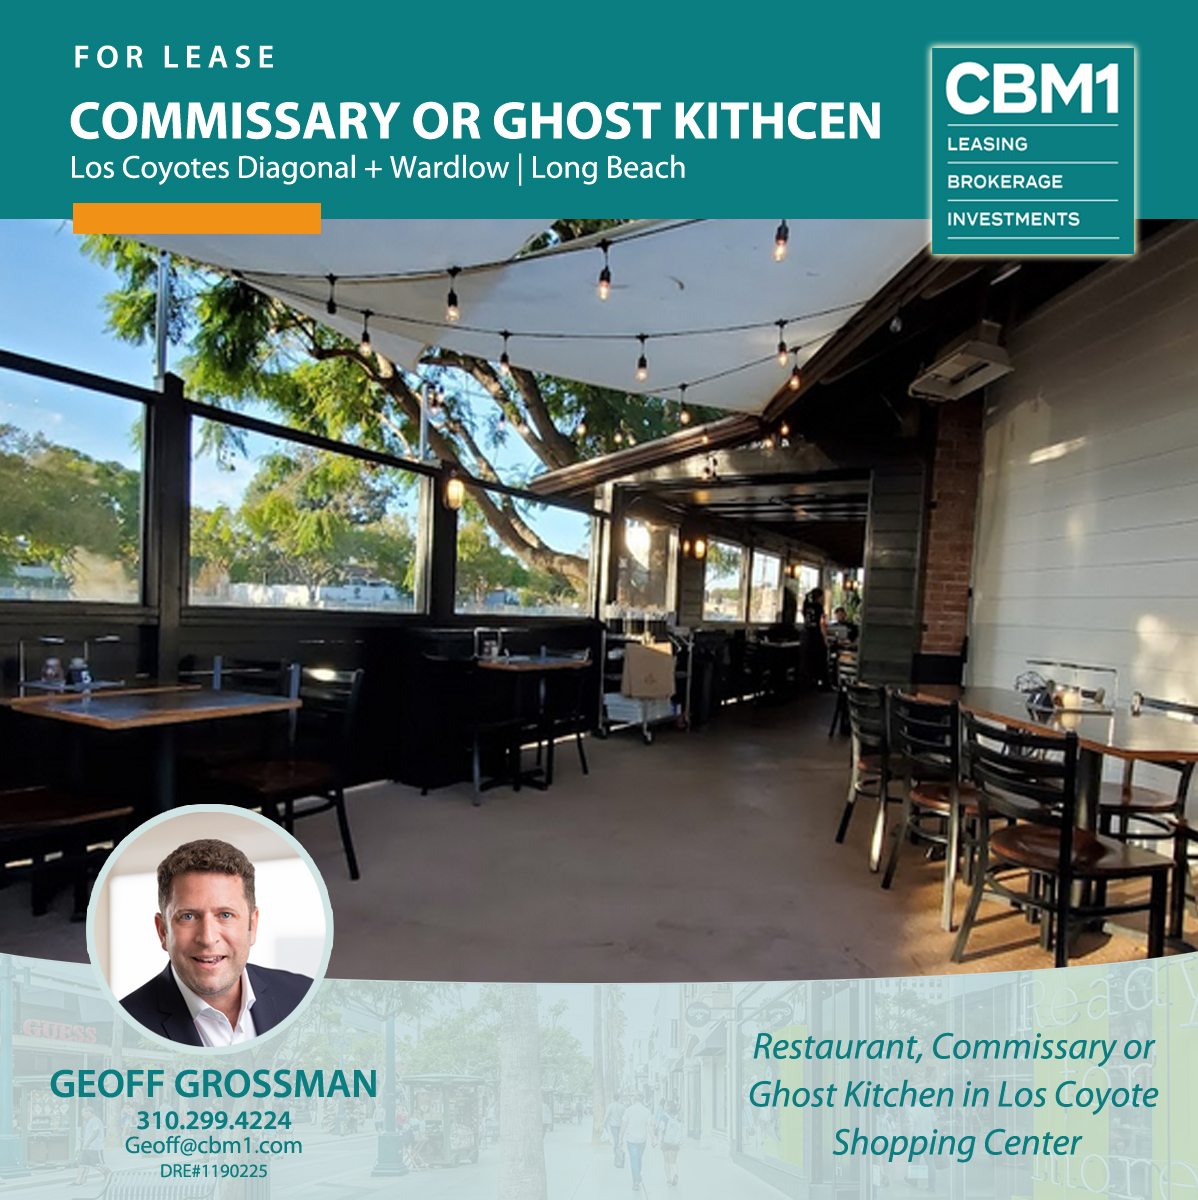 Potential Restaurant, Commissary or Ghost Kitchen Available at Los Coyote Diagonal in Prime Long Beach
#cbm1 #cre #retailleasing #retailrealestate #commissarykitchen #ghostkitchen #restaurant #loscoyotesdiag #longbeach